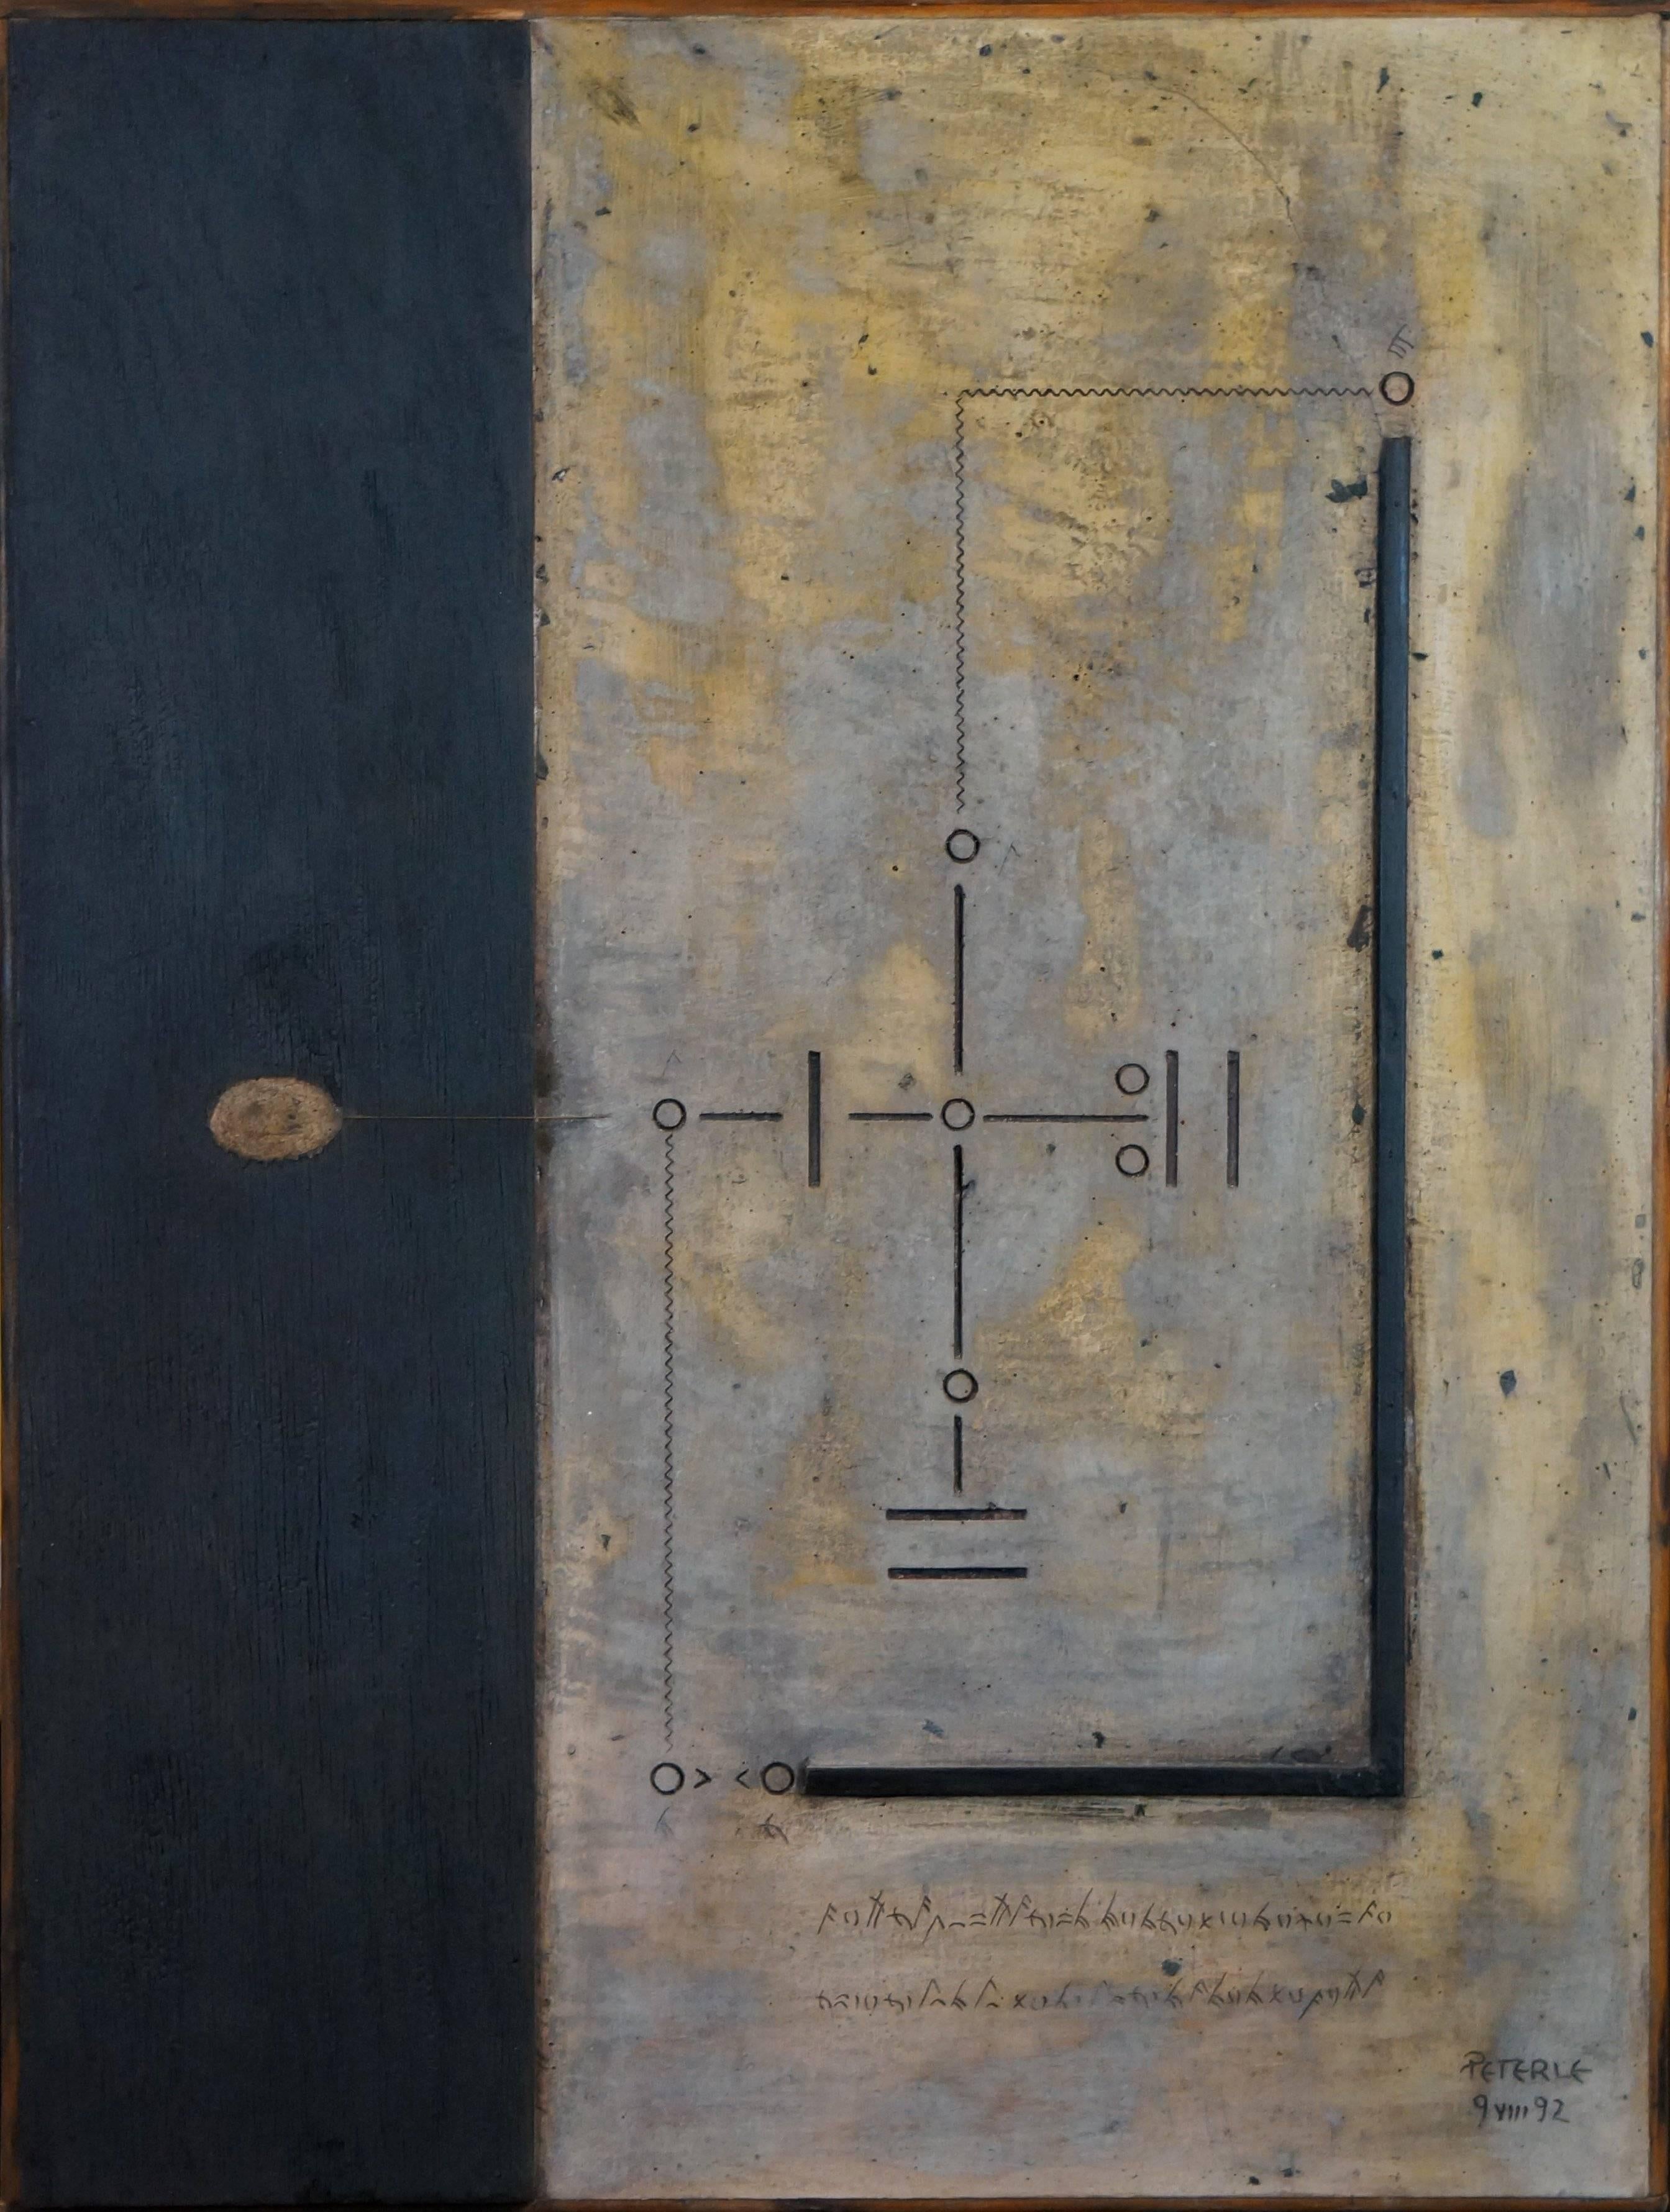 Abstract Composition PIII, 1992 - mixed media, 82x61 cm, framed